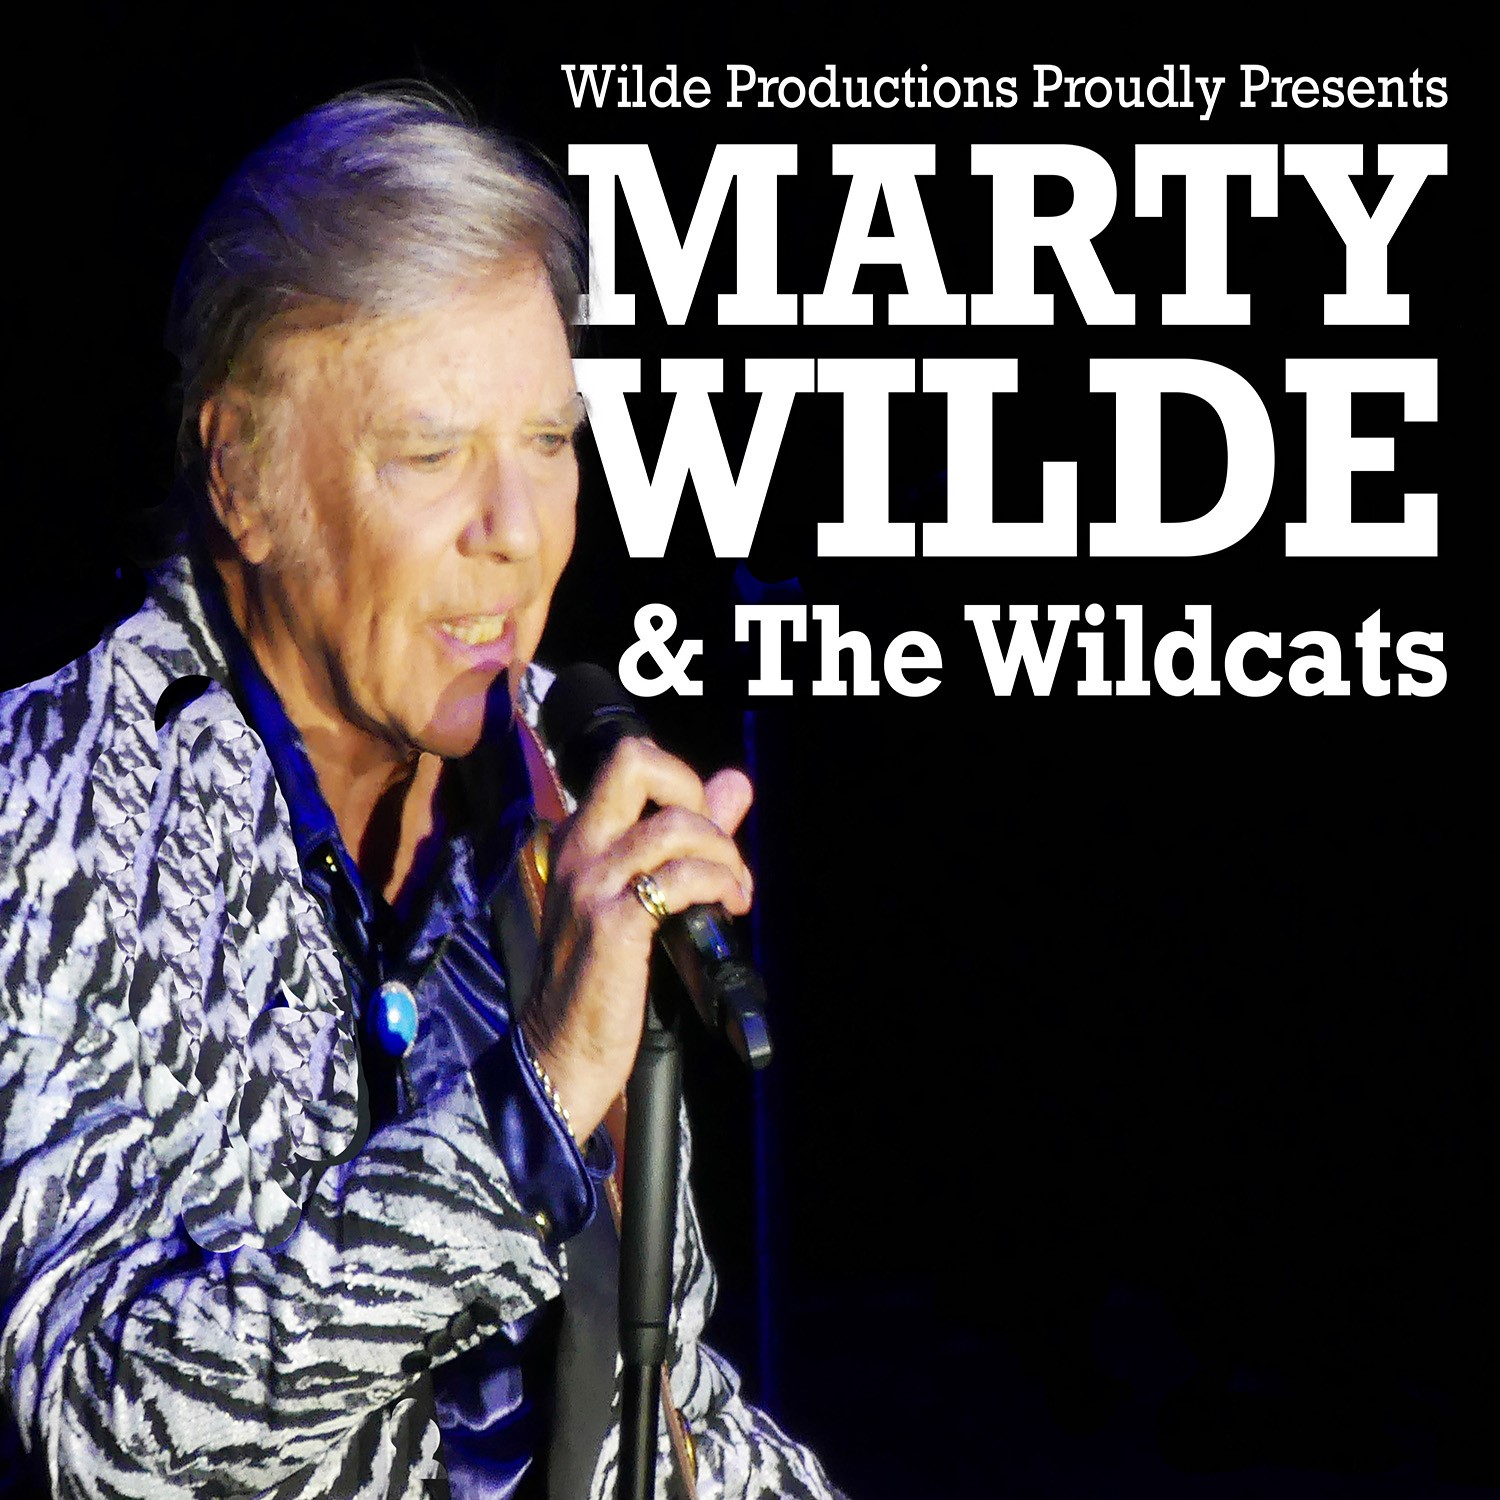 Marty Wilde & The Wildcats Greatest Hits Tour